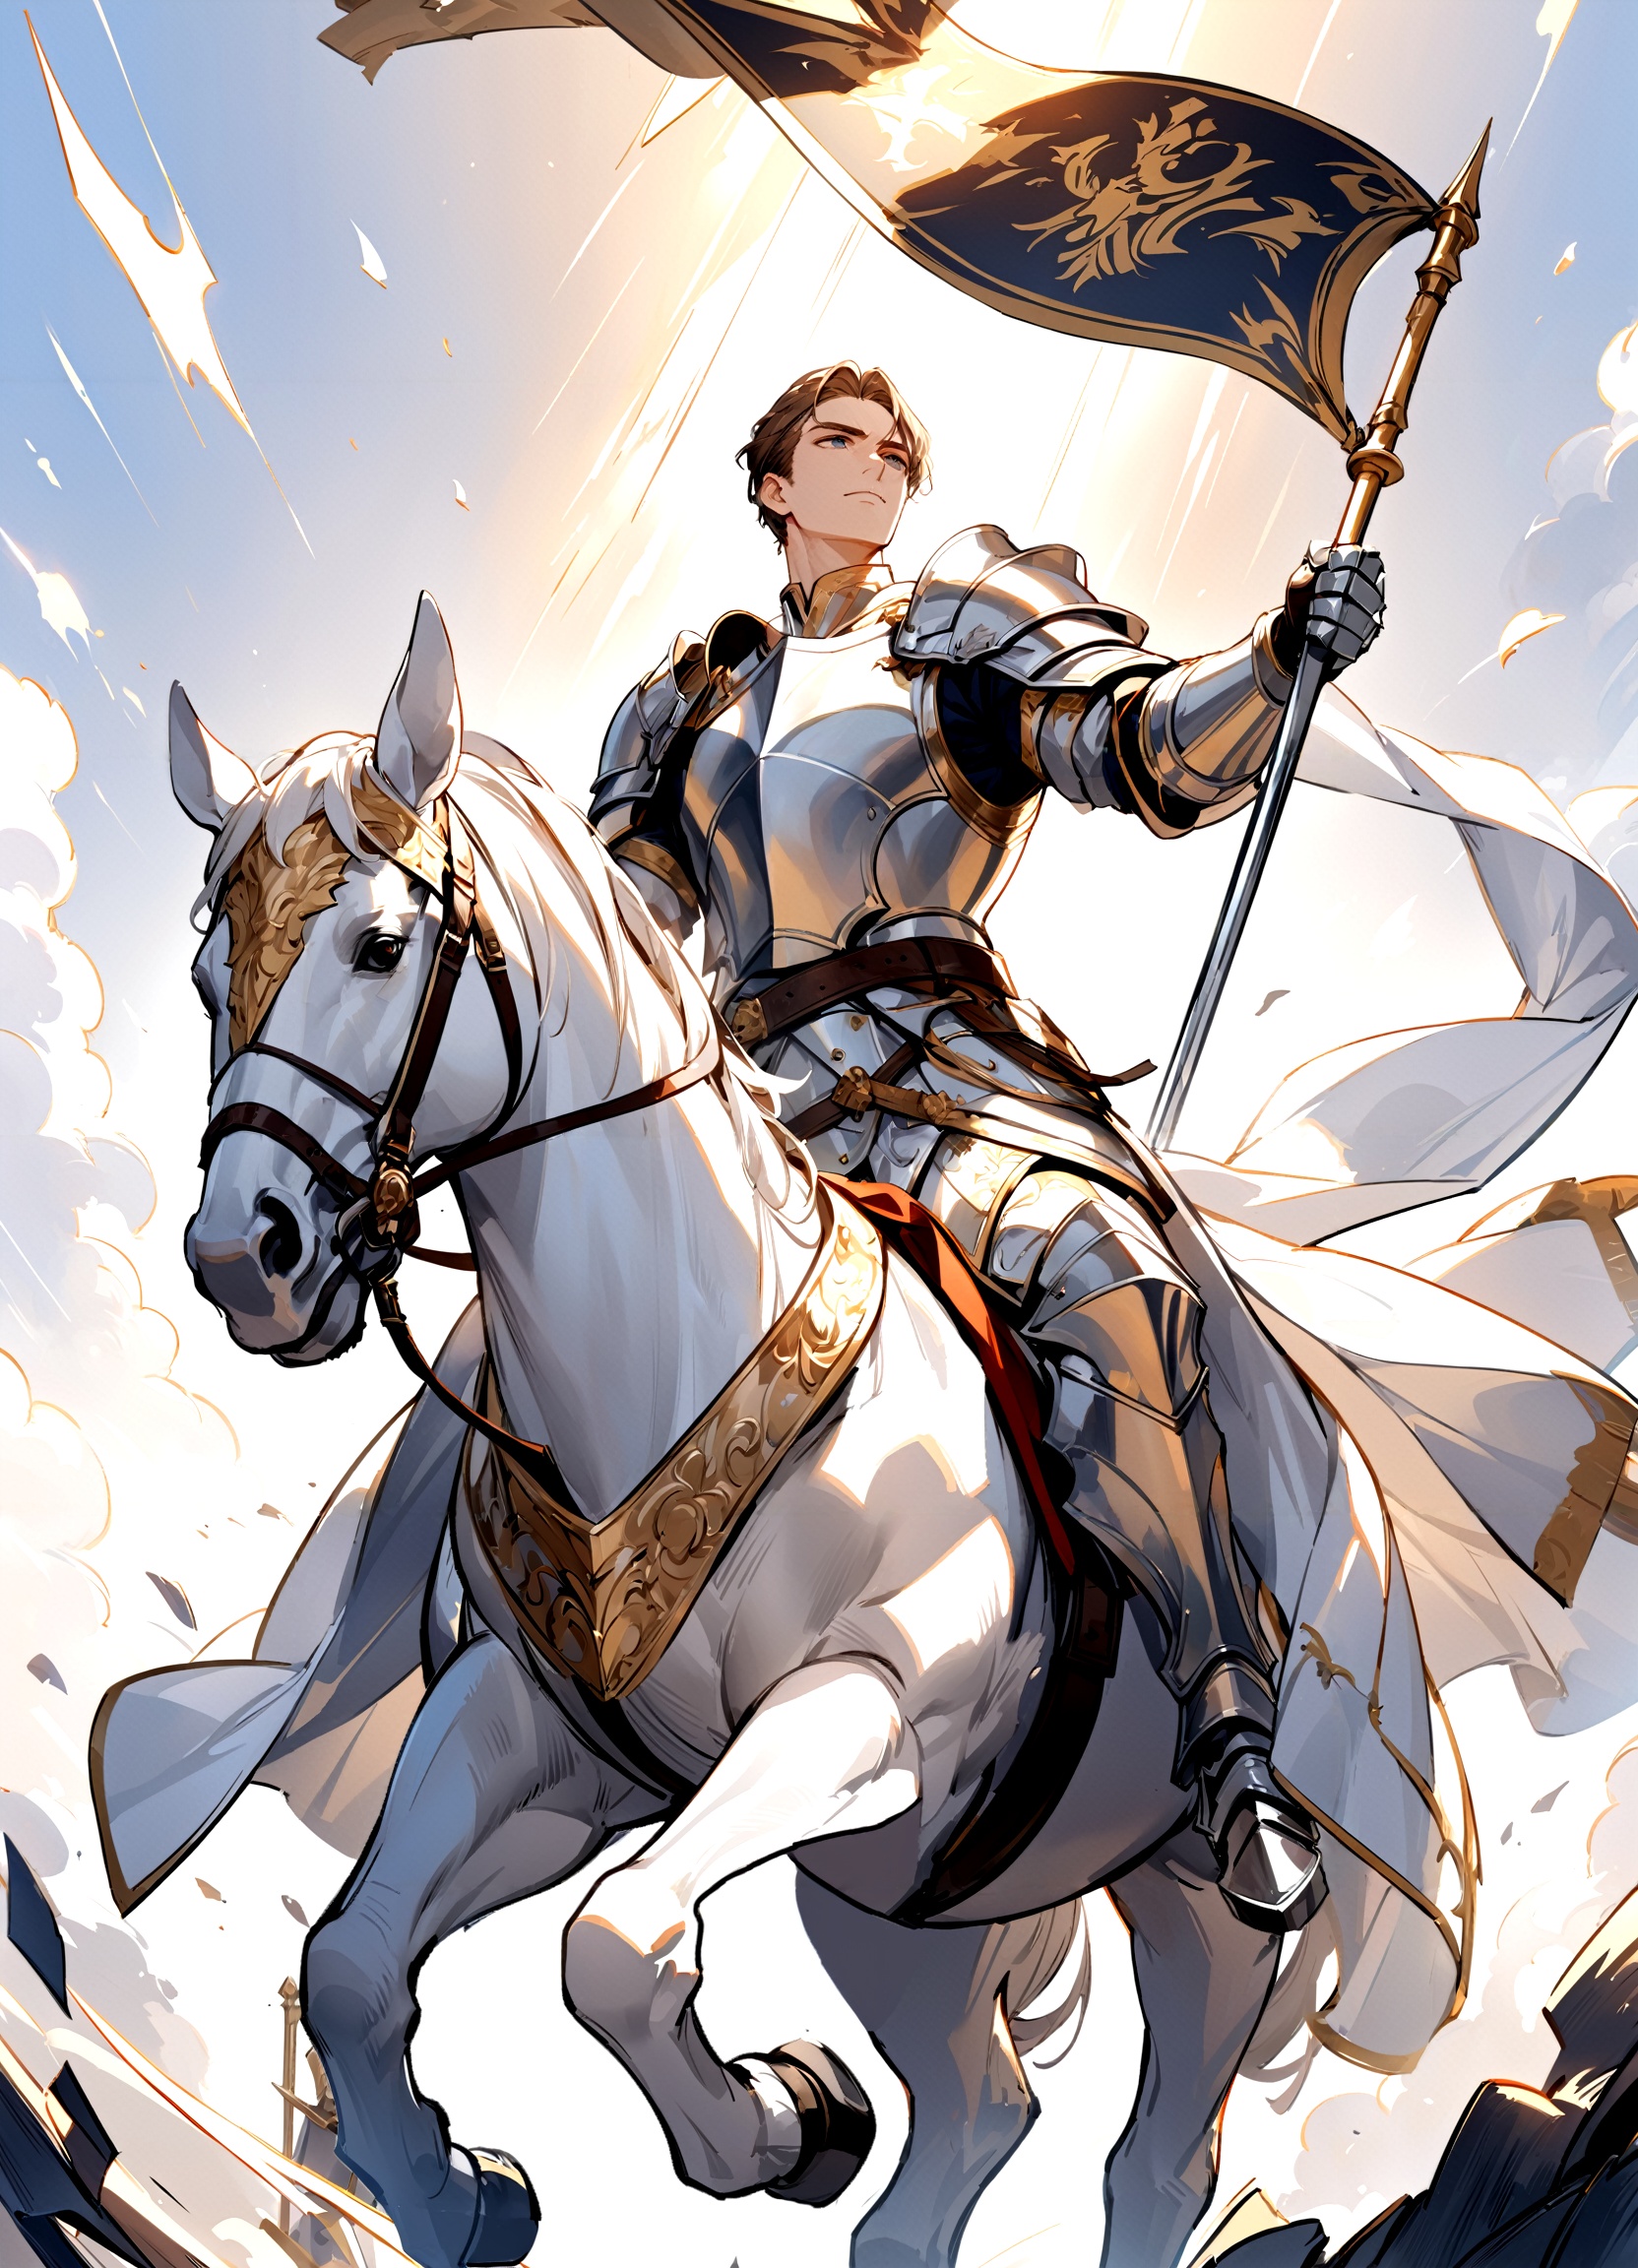 riding horse,holding flag,handsome,from below,An illustration featuring a gallant knight, poised to deliver a courageous strike. The knight is dressed in shining armor, exuding strength and bravery. With a firm grip on his sword, he raises it high above his head, ready to unleash a powerful and valiant attack. His expression is focused and determined, reflecting his unwavering resolve. The color palette chosen for this image includes deep shades of silver and gold, emphasizing the knight's regal and noble presence. The overall result is a culturally rich portrayal of a dashing knight delivering a heroic blow, beautifully rendered in a style that captures the essence of chivalry and valor.